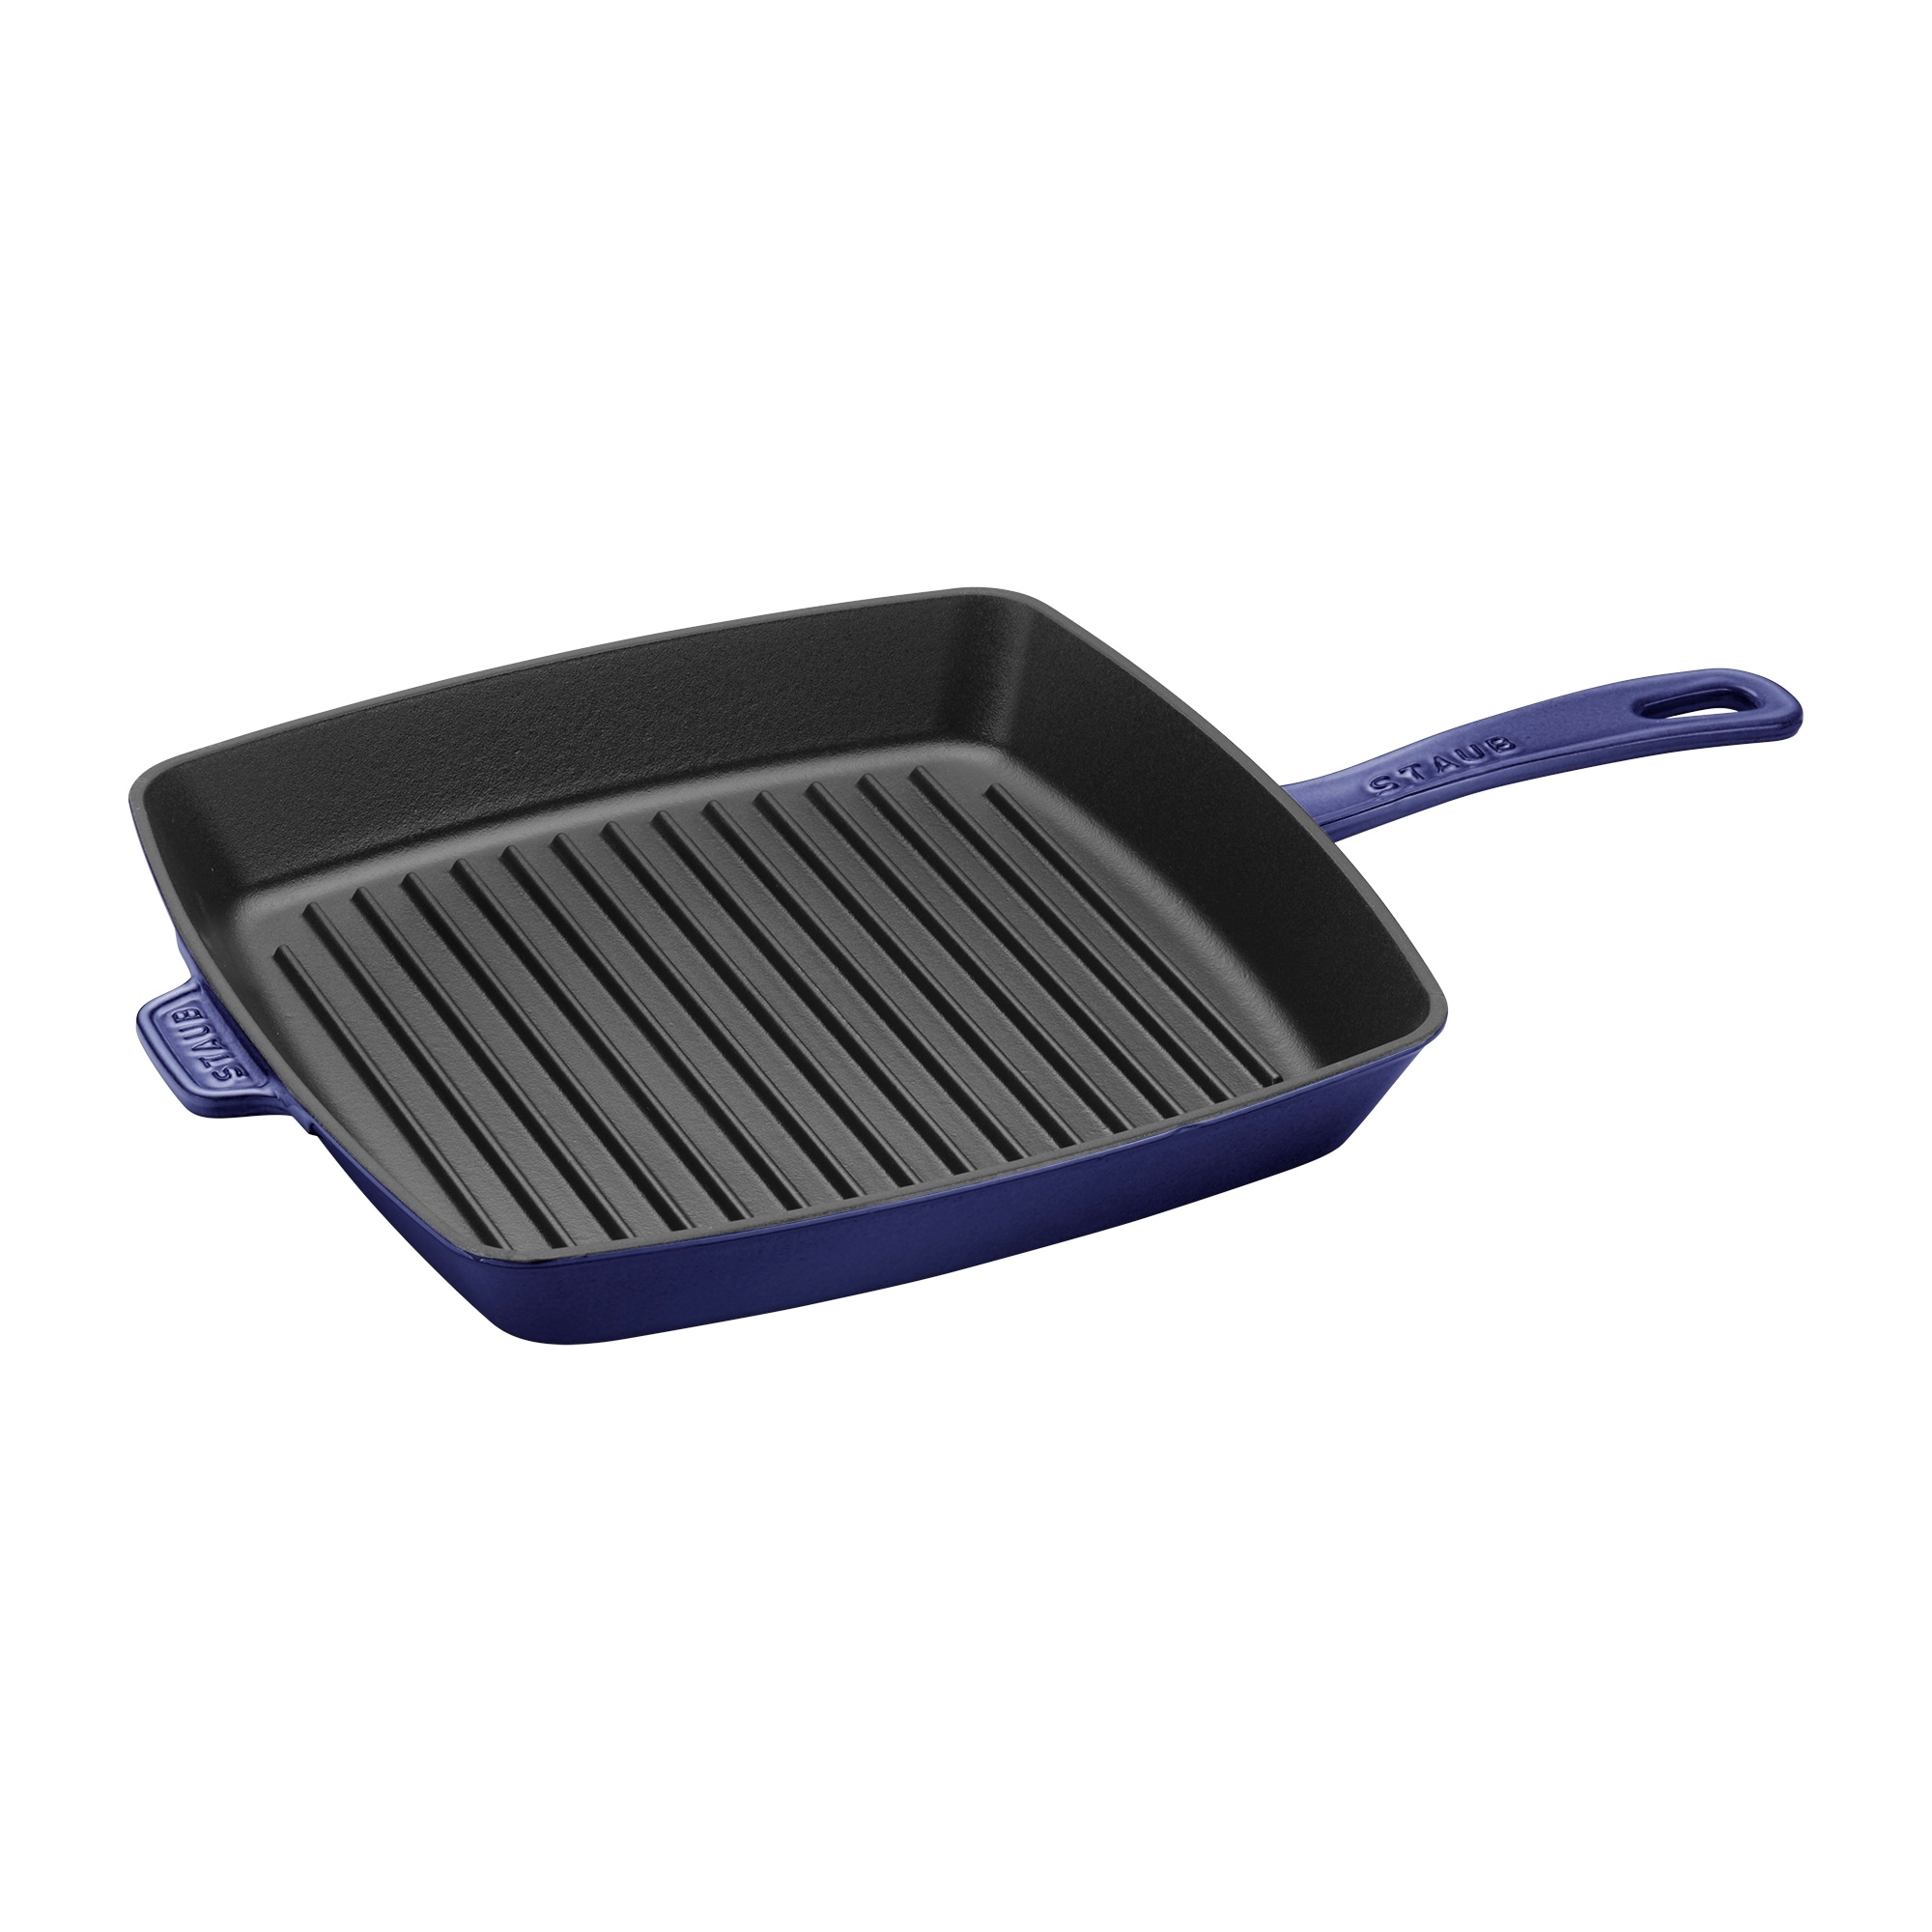 https://ak1.ostkcdn.com/images/products/is/images/direct/96aba020b54dafe8484321a9c1abf3ffa75d9560/Staub-Cast-Iron-12-inch-Square-Grill-Pan.jpg